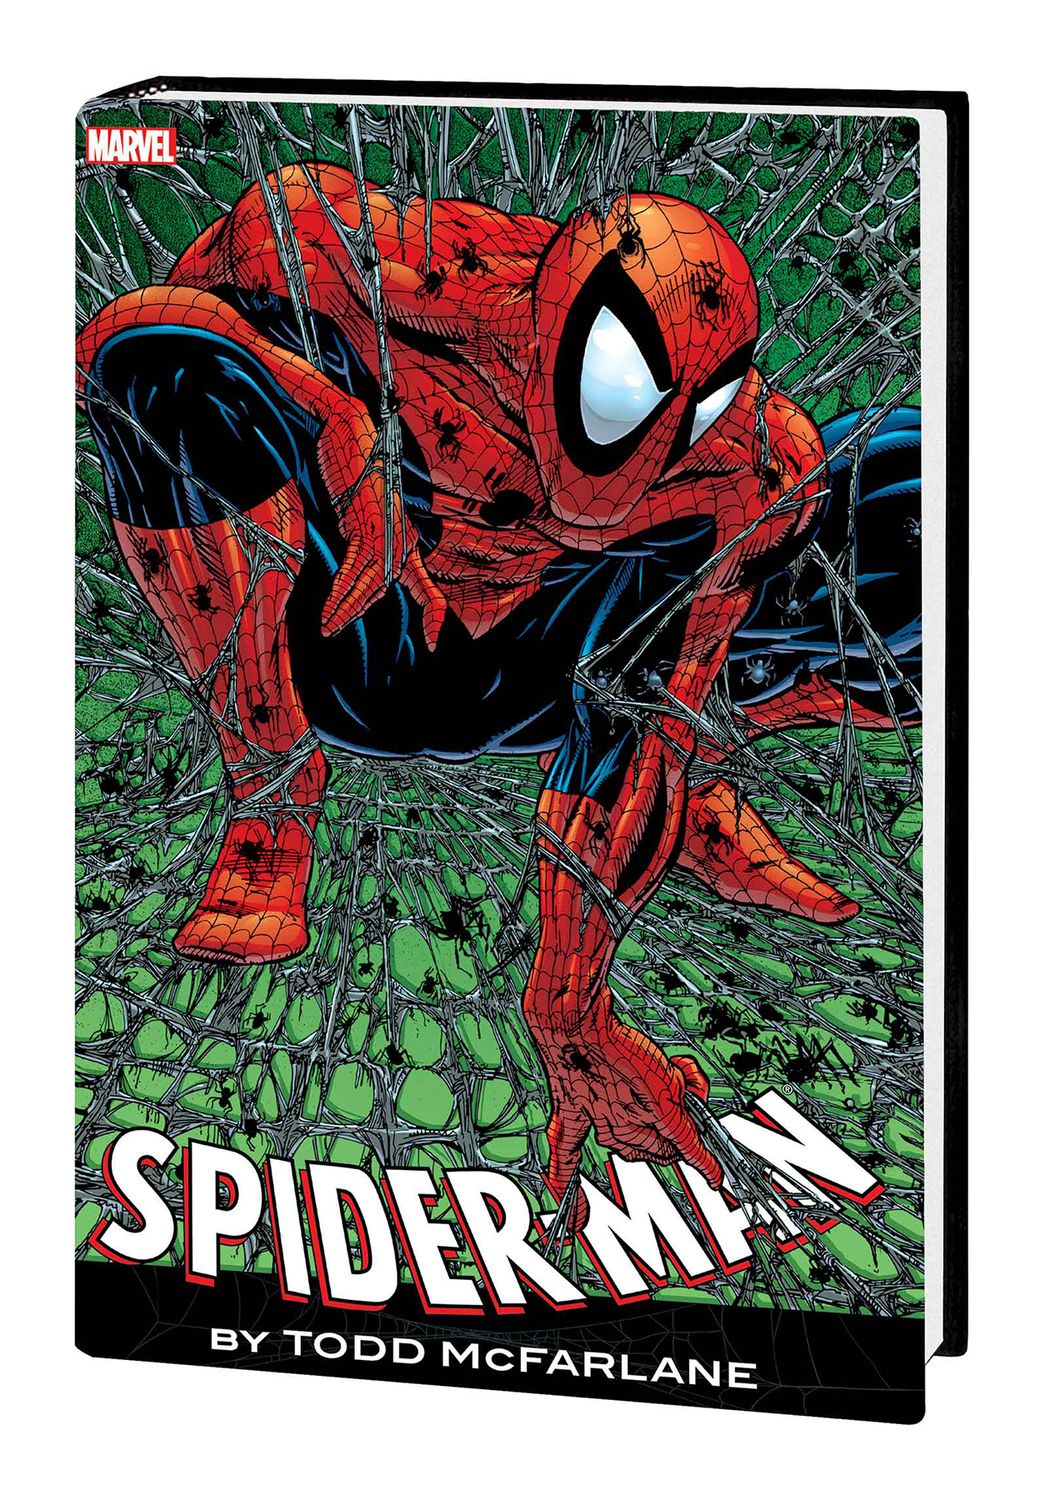 Comics　by　Omnibus　(Red　Entertainment　Printing　published　Blue　McFarlane:　Marvel:　Cult　Worldwide　Megastore　New　Hardcover)　UK　by　Spider-Man　Marvel　McFarlane　Todd　By　Cover　Cost　and